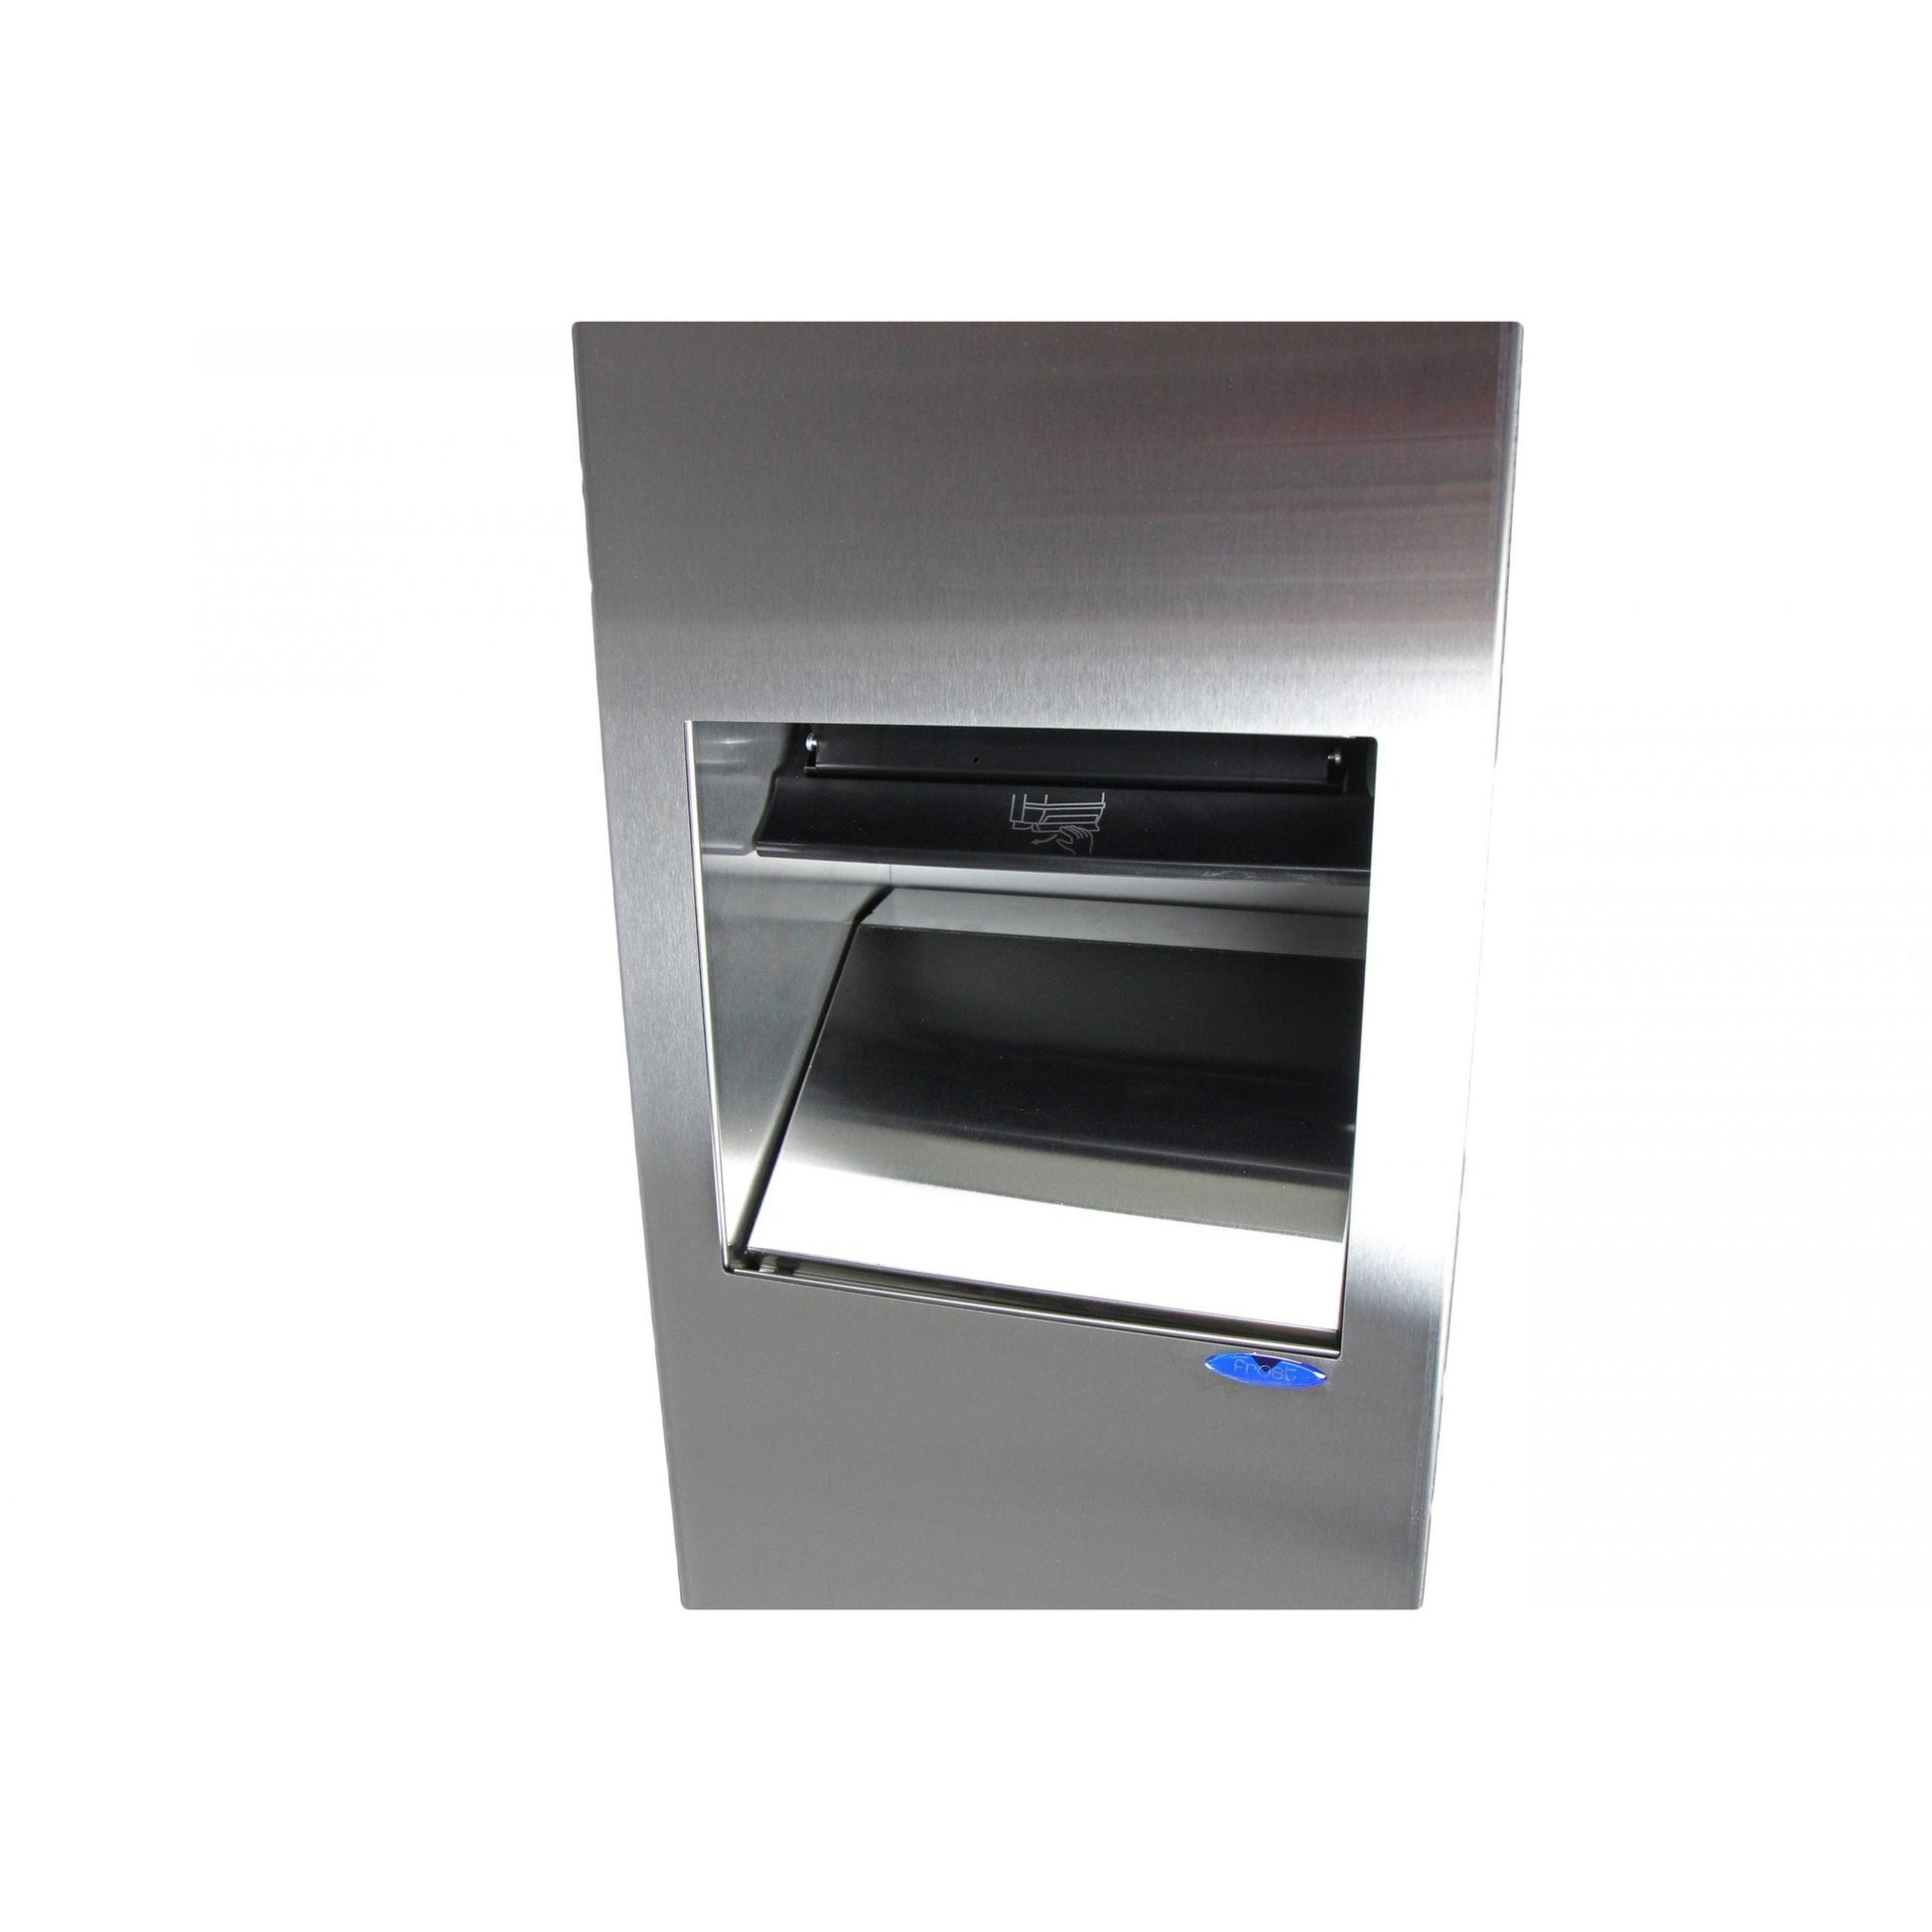 Frost 400-50A Recessed Control Roll Stainless Steel Paper Dispenser and Disposal